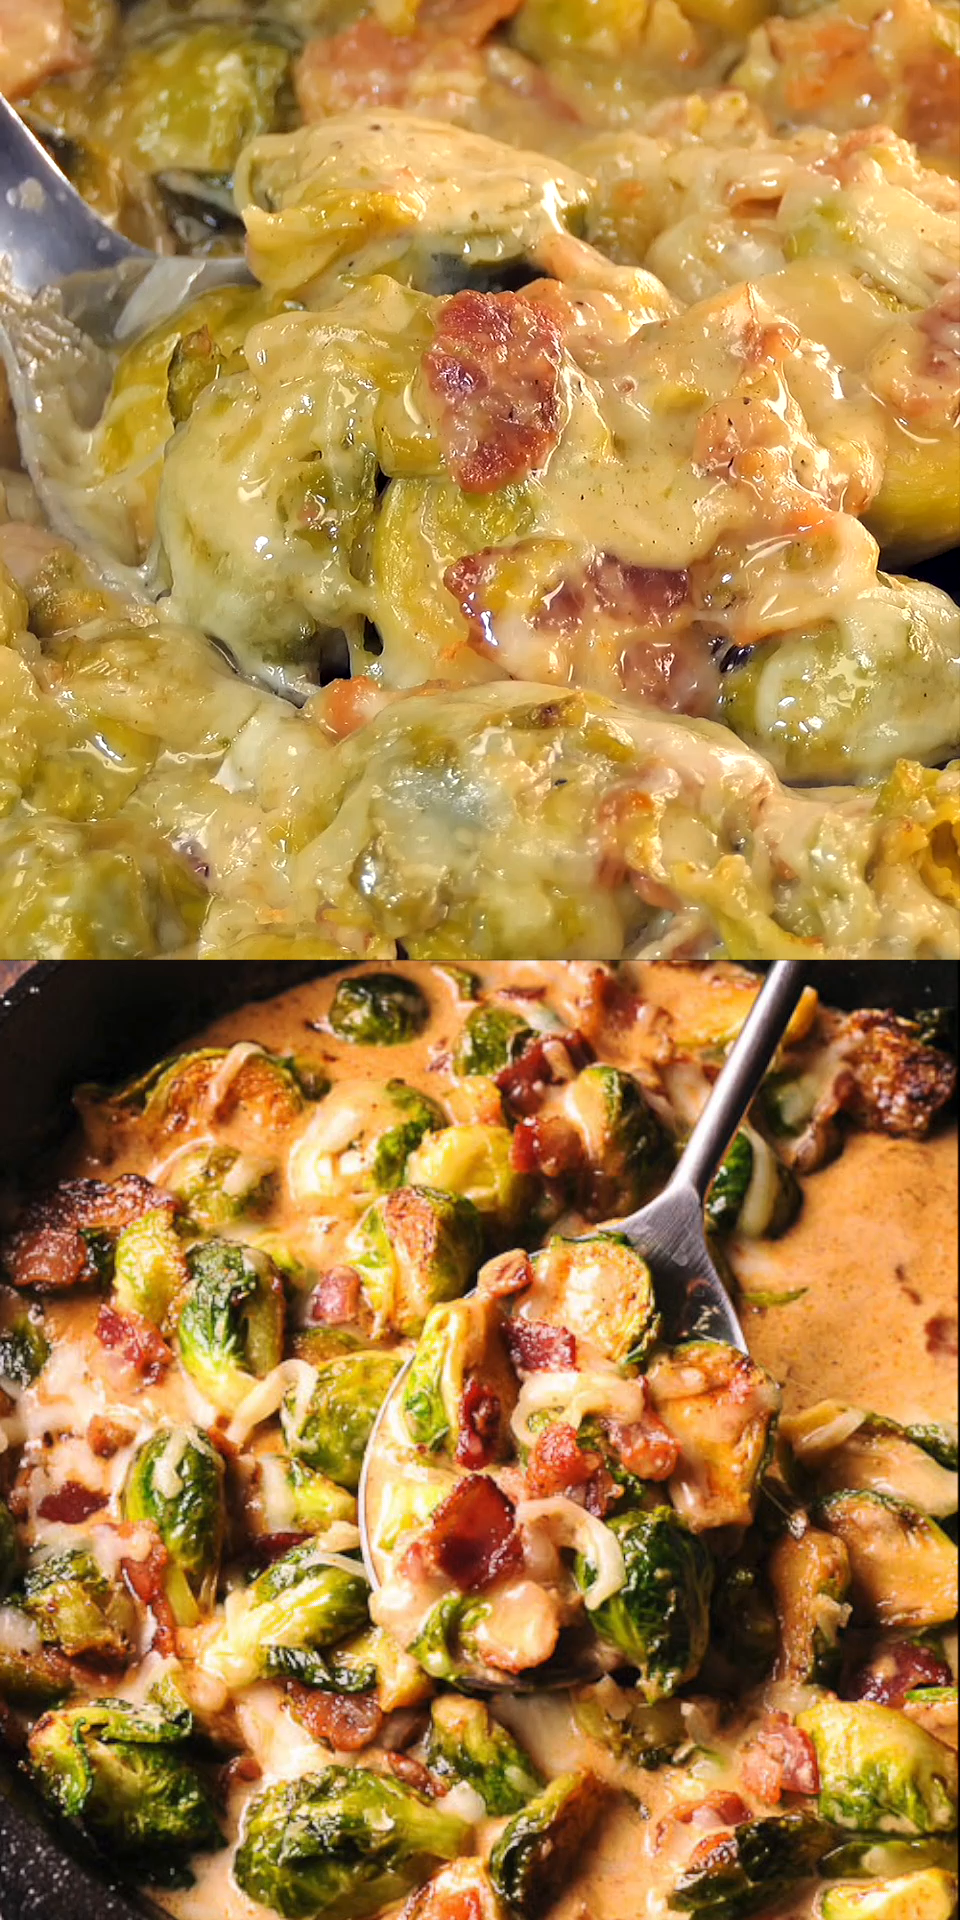 Creamy Bacon Brussels Sprouts with Mozzarella -   17 savory holiday Food ideas